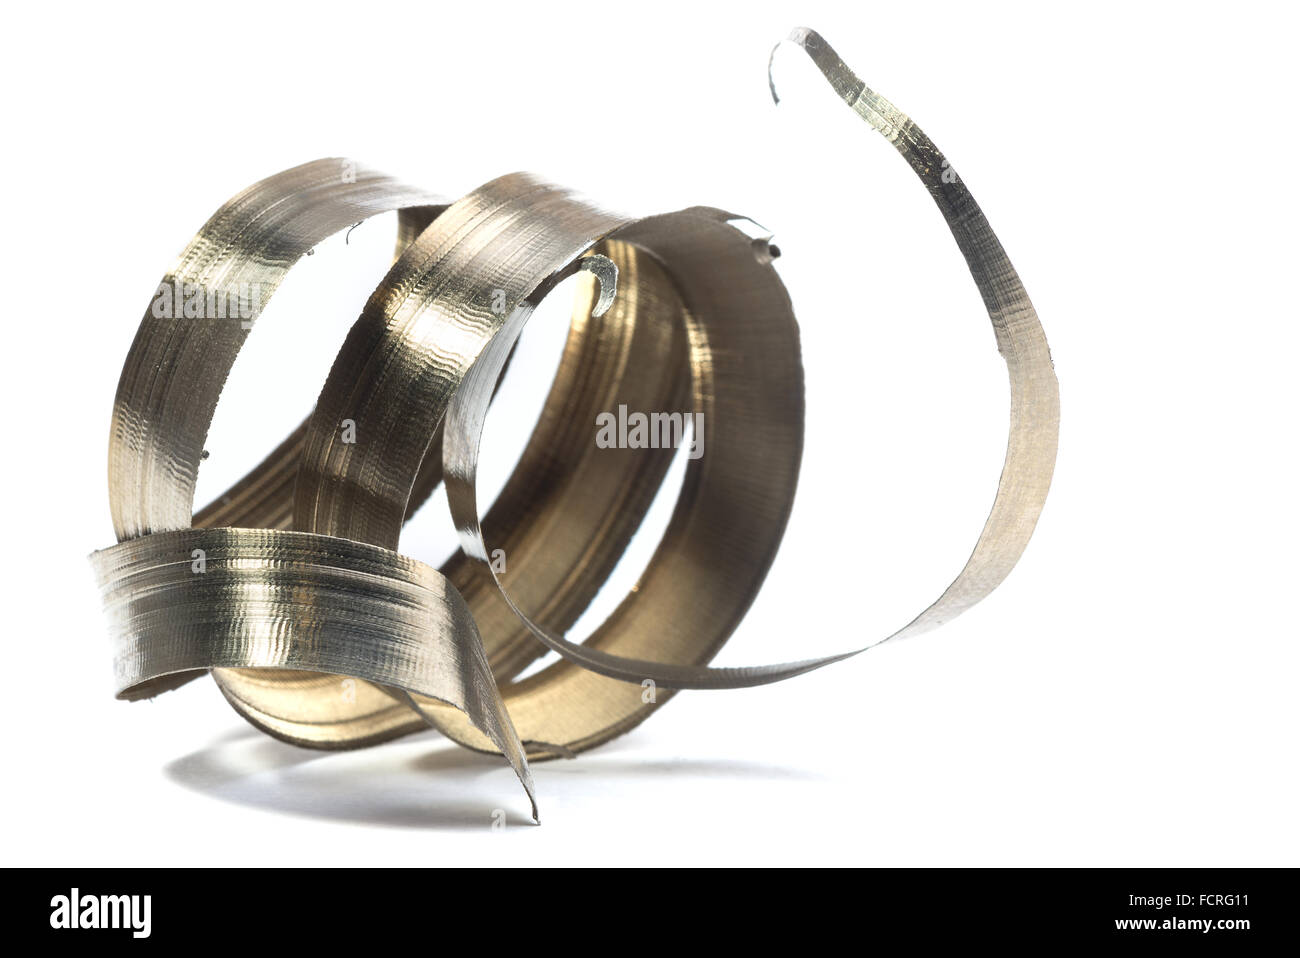 metal spiral shavings from the lathe tool Stock Photo